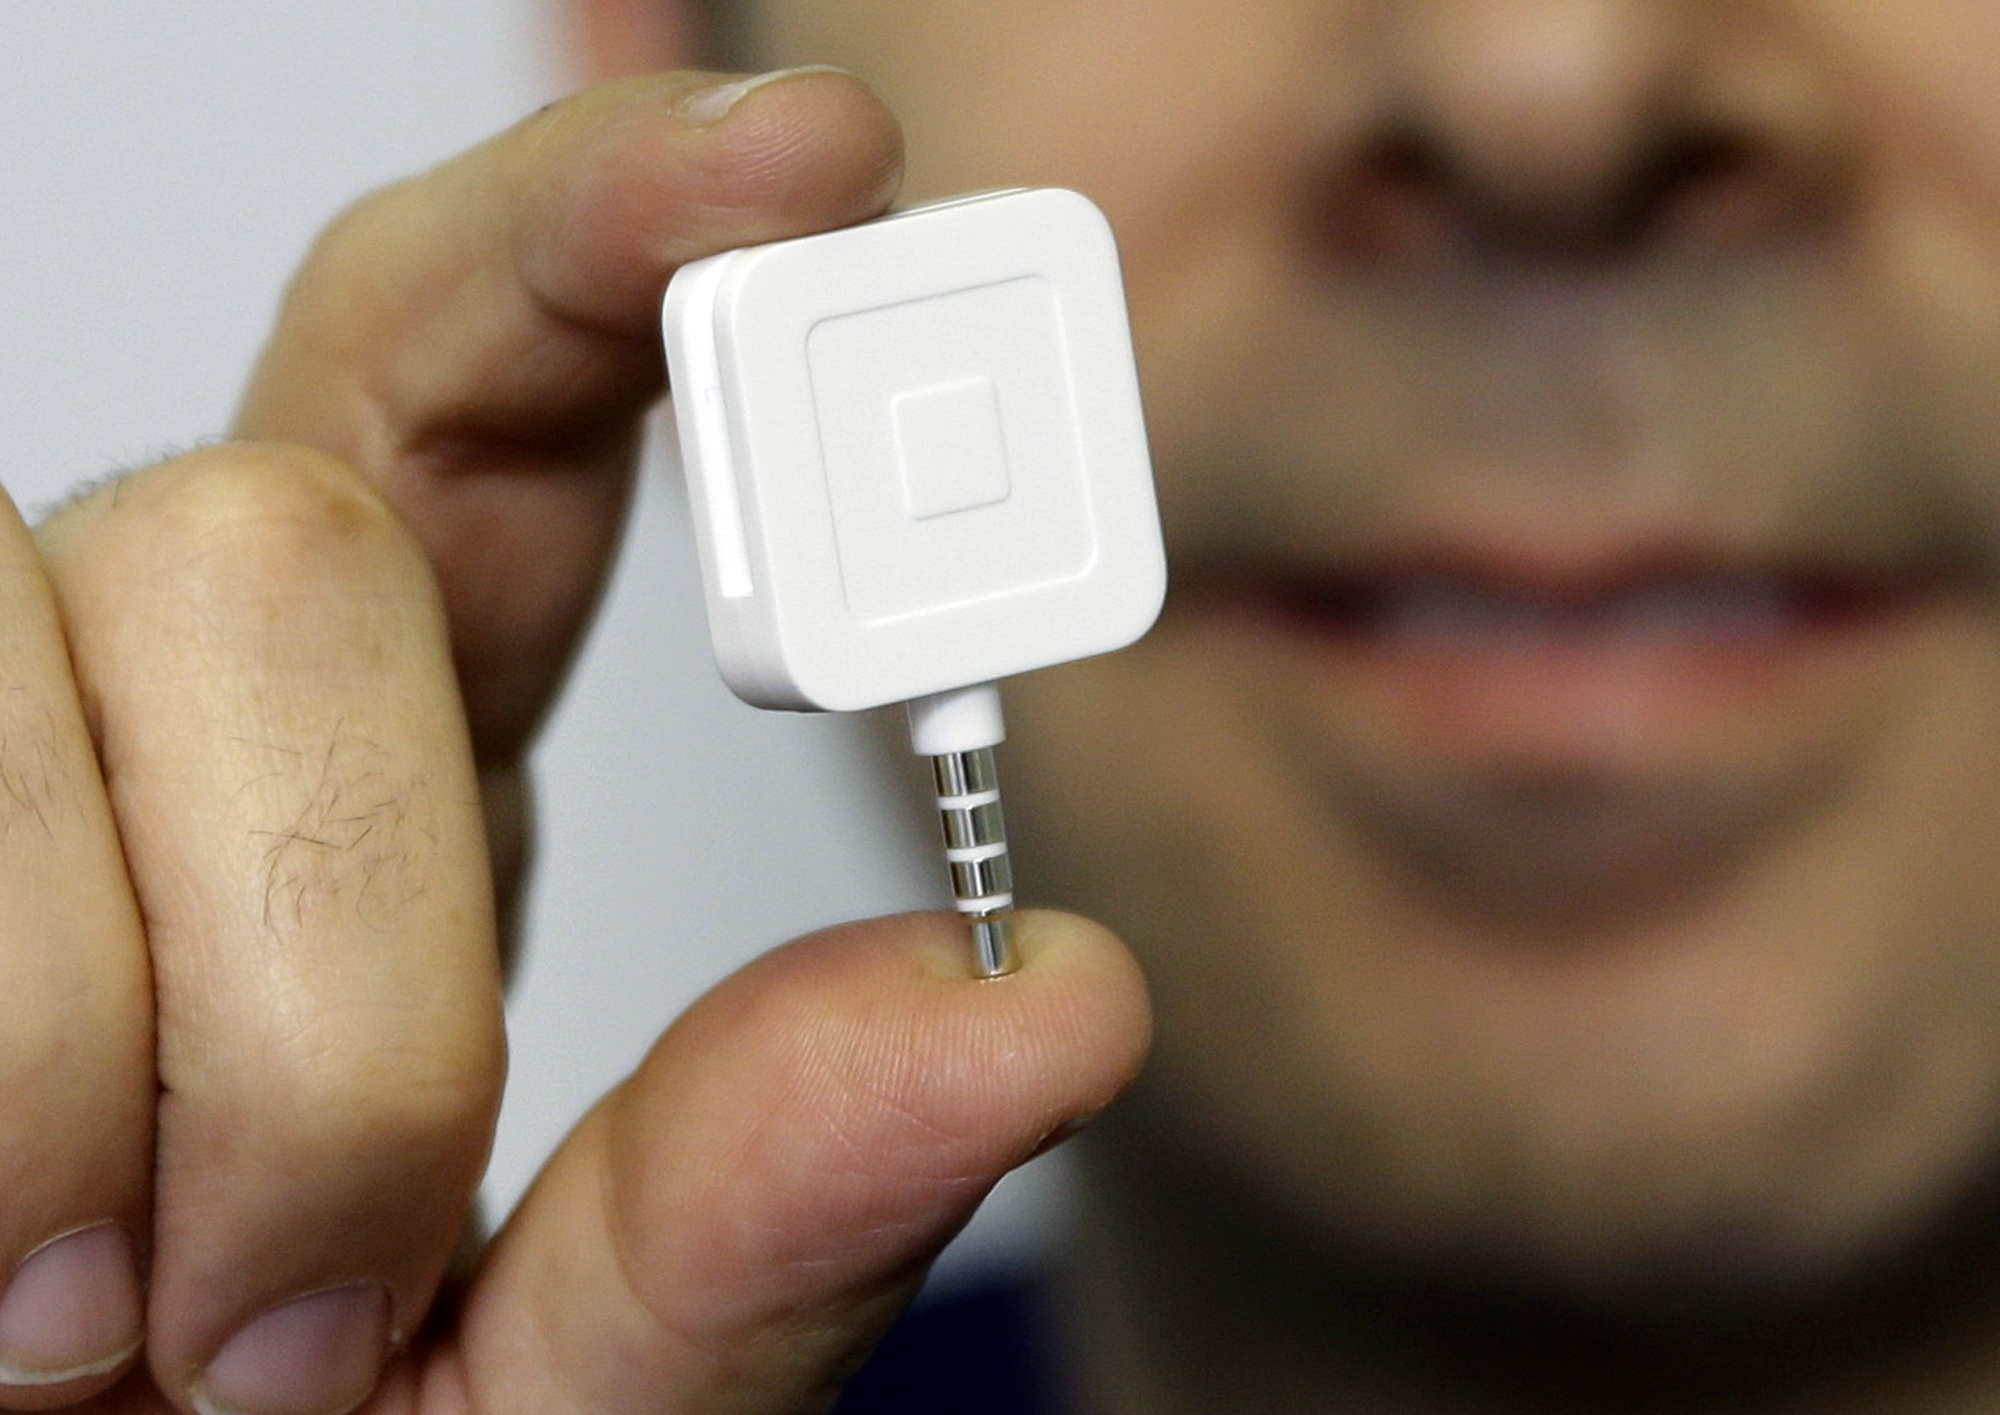 The Square credit card reader